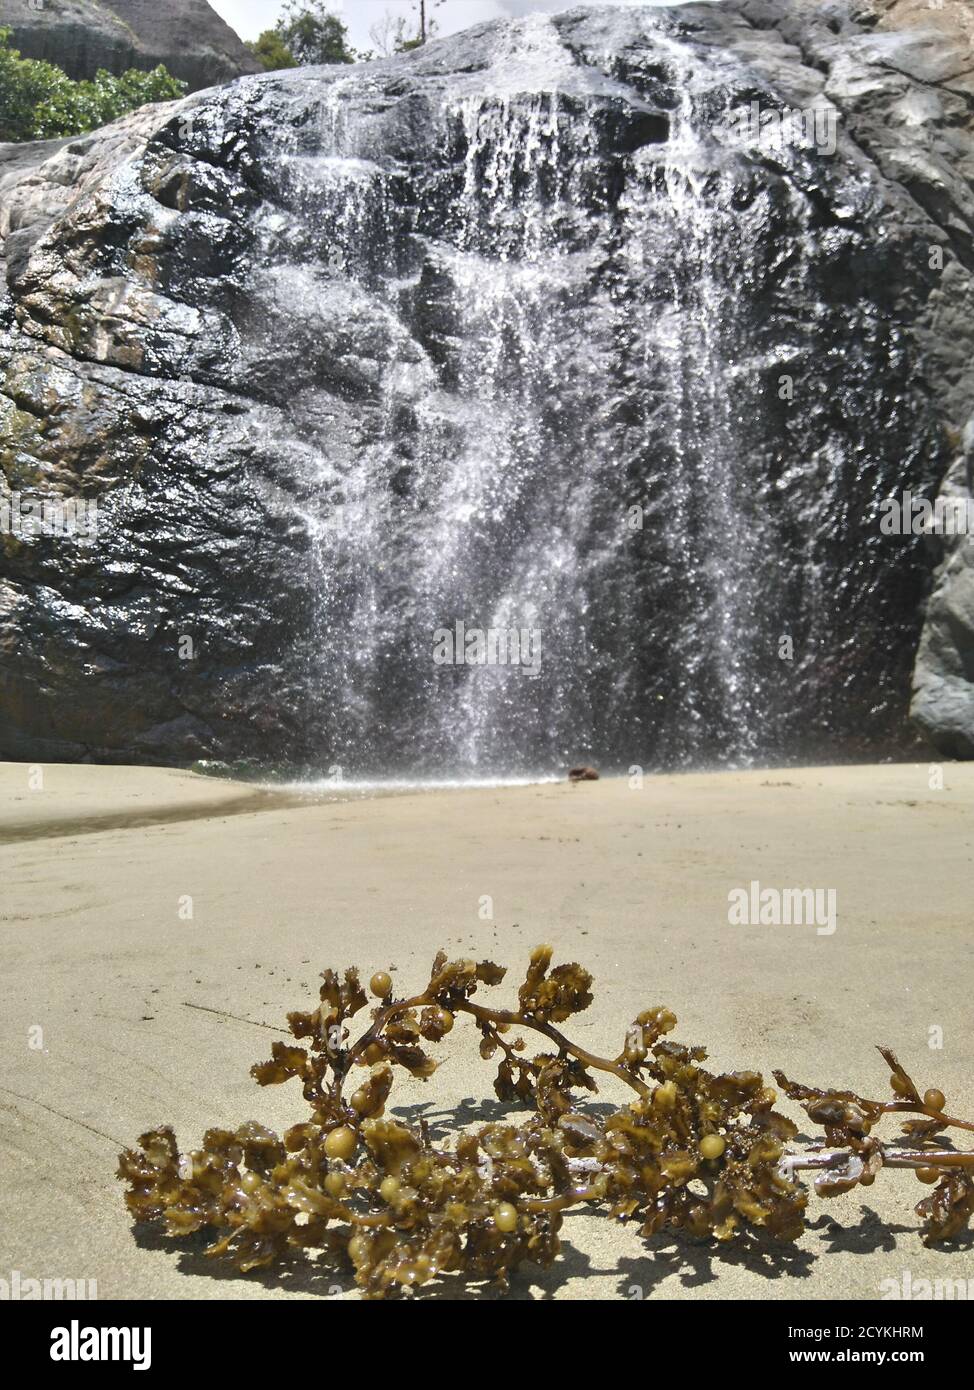 Seaweed on The Beach Beside A Large Rock With A Small Waterfall Stock Photo